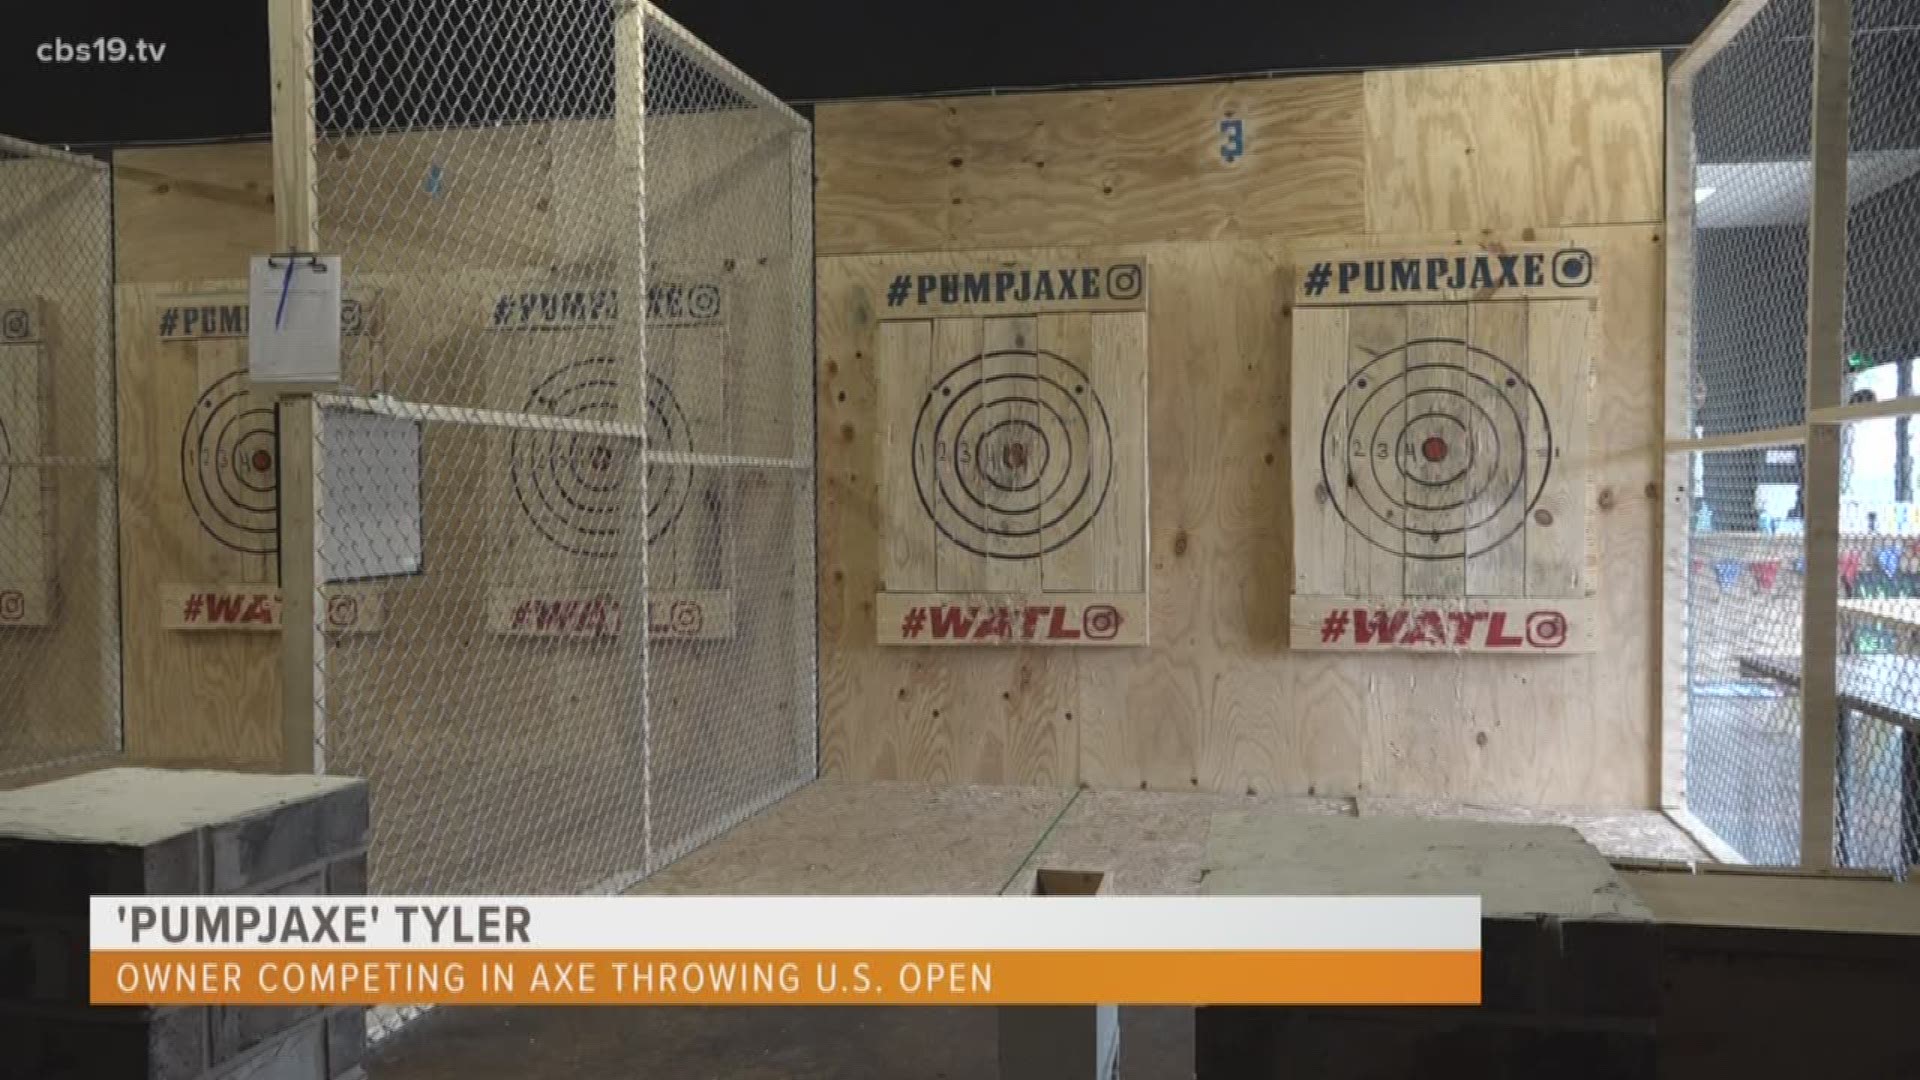 PUMPJAXE, an axe throwing venue in Tyler, opened its door in June. One of the owners plans to compete in the 2019 World Axe Throwing U.S. Open.